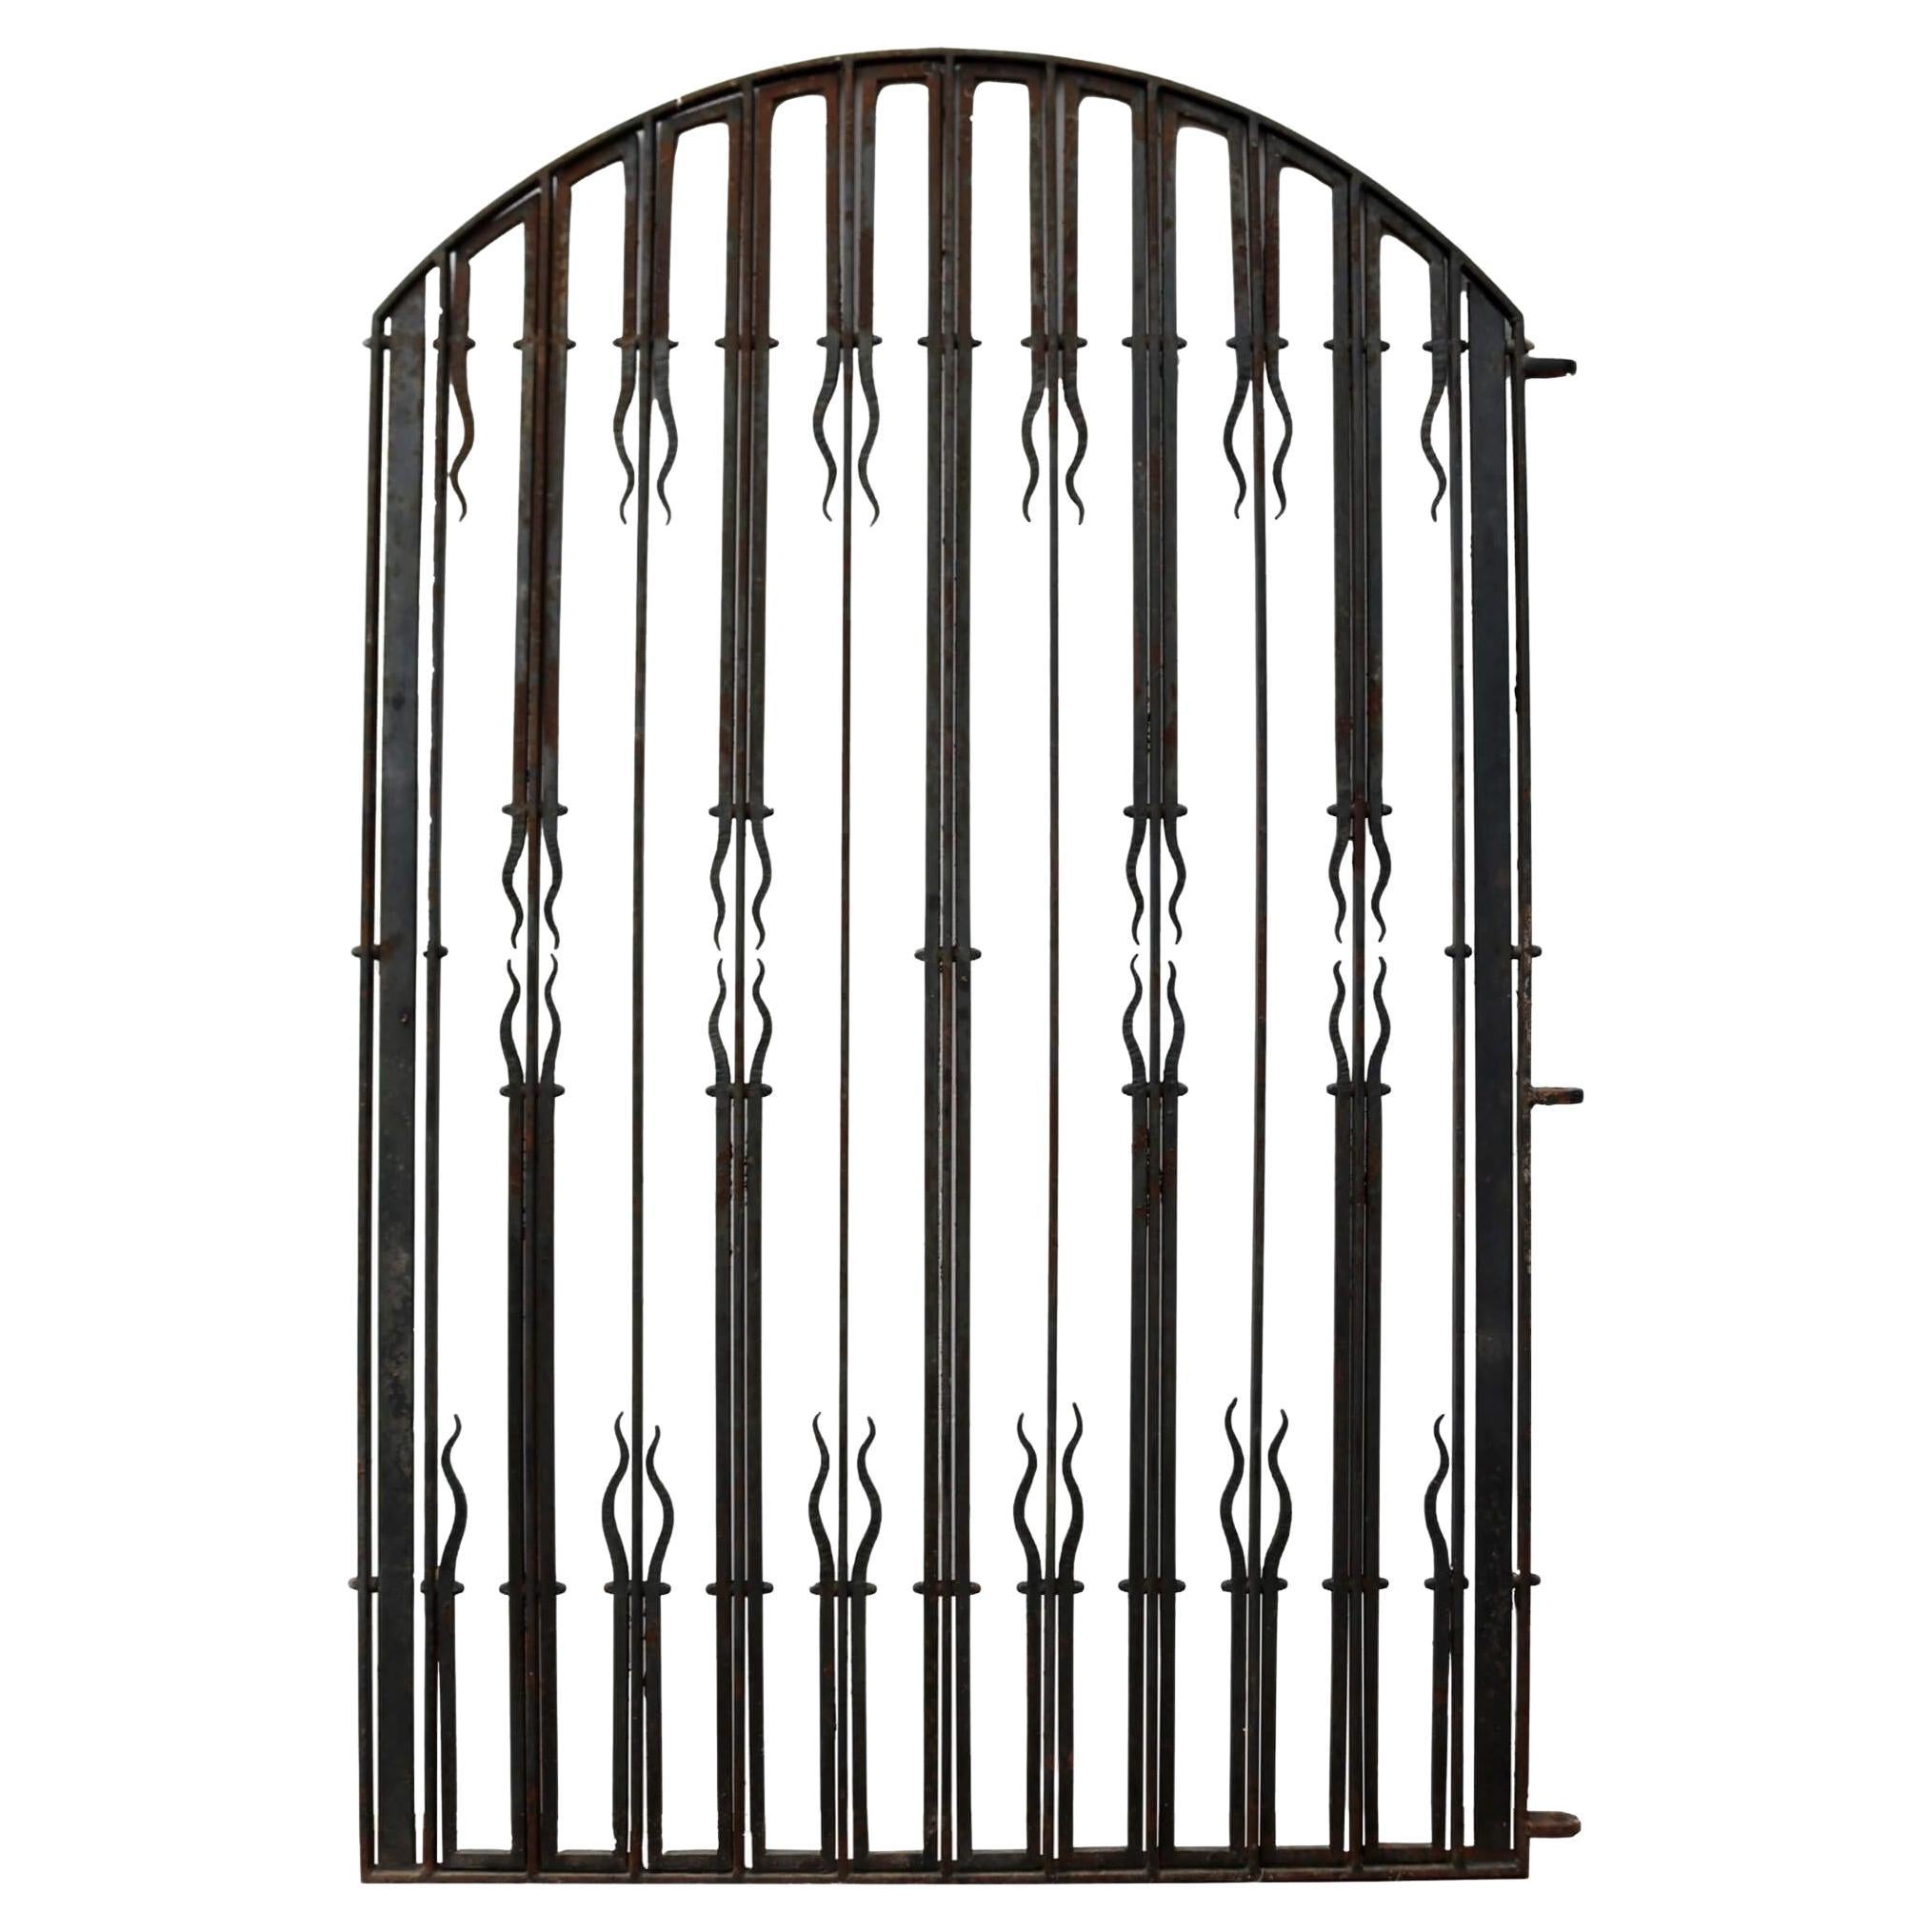 Large Arched Garden Gate in Wrought Iron